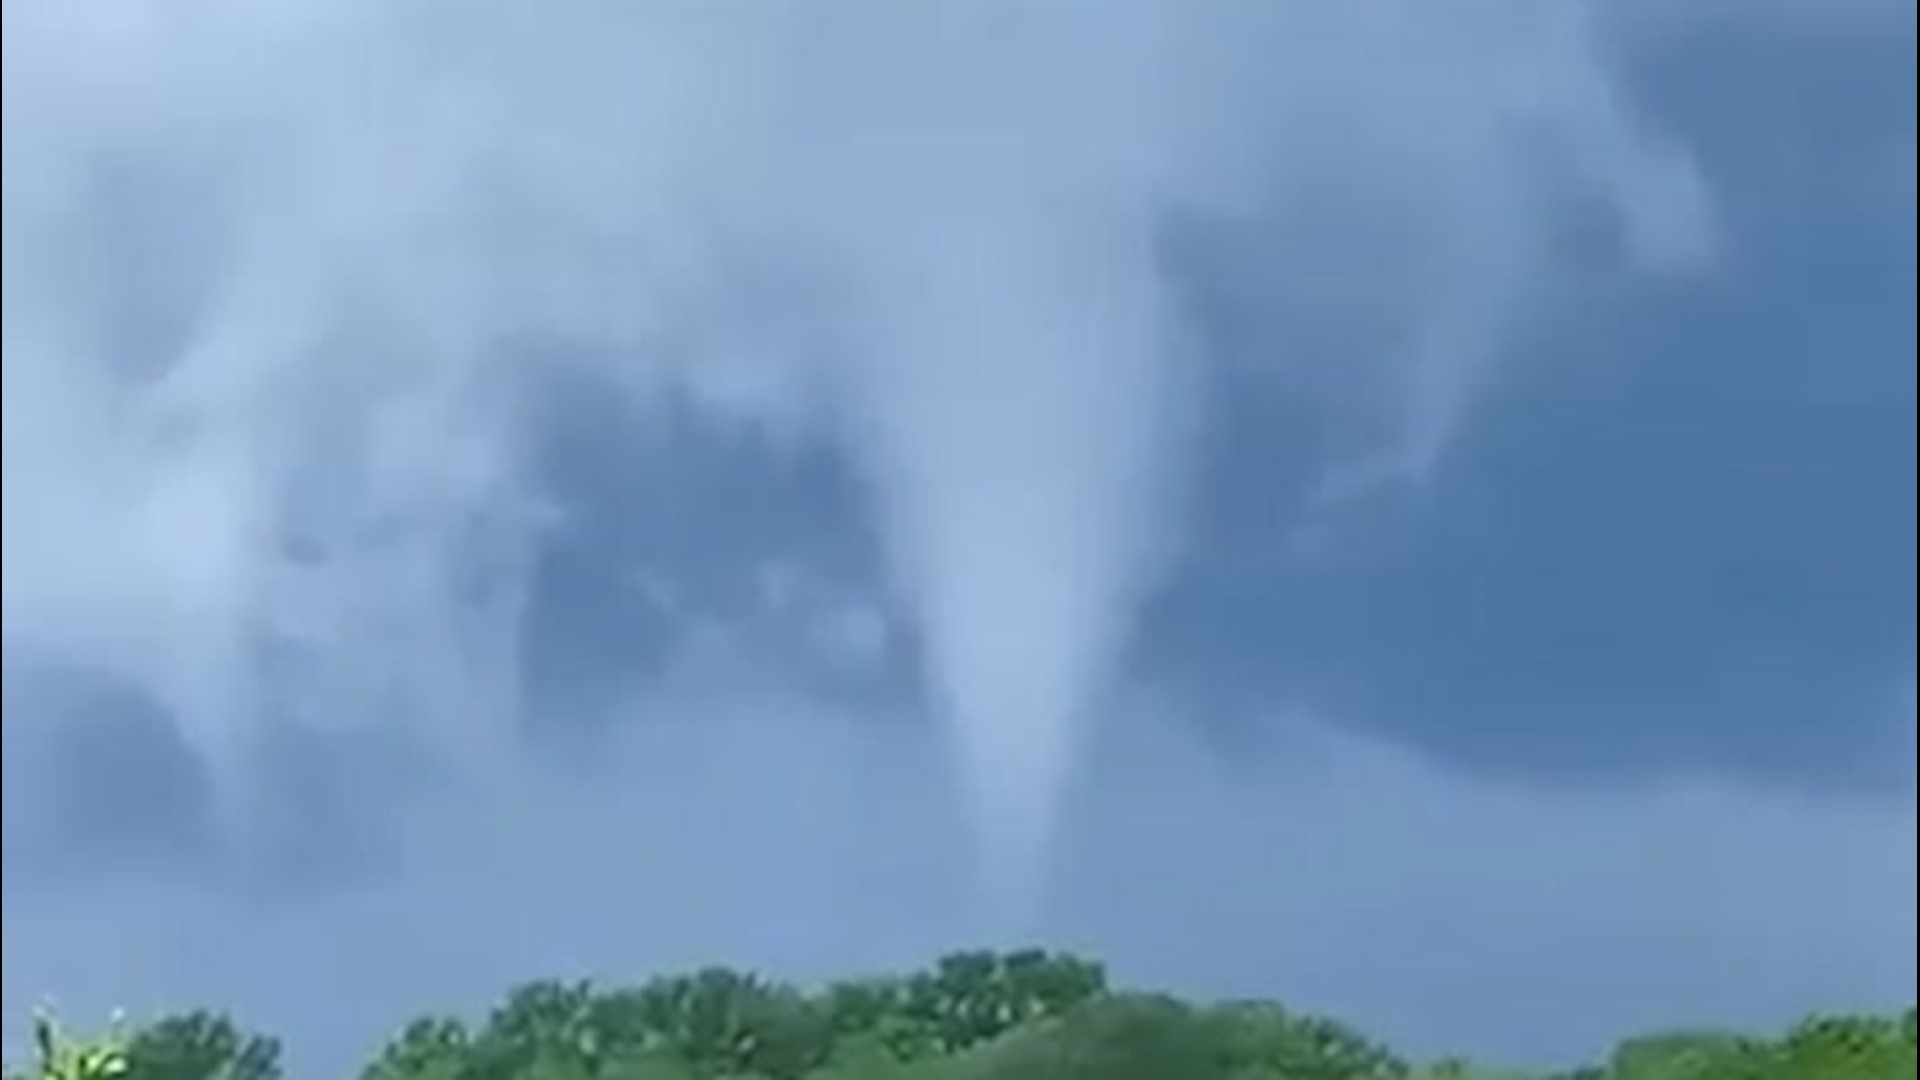 A confirmed tornado was filmed swirling from a distance by a spectator in Waukee, Iowa, on May 26.